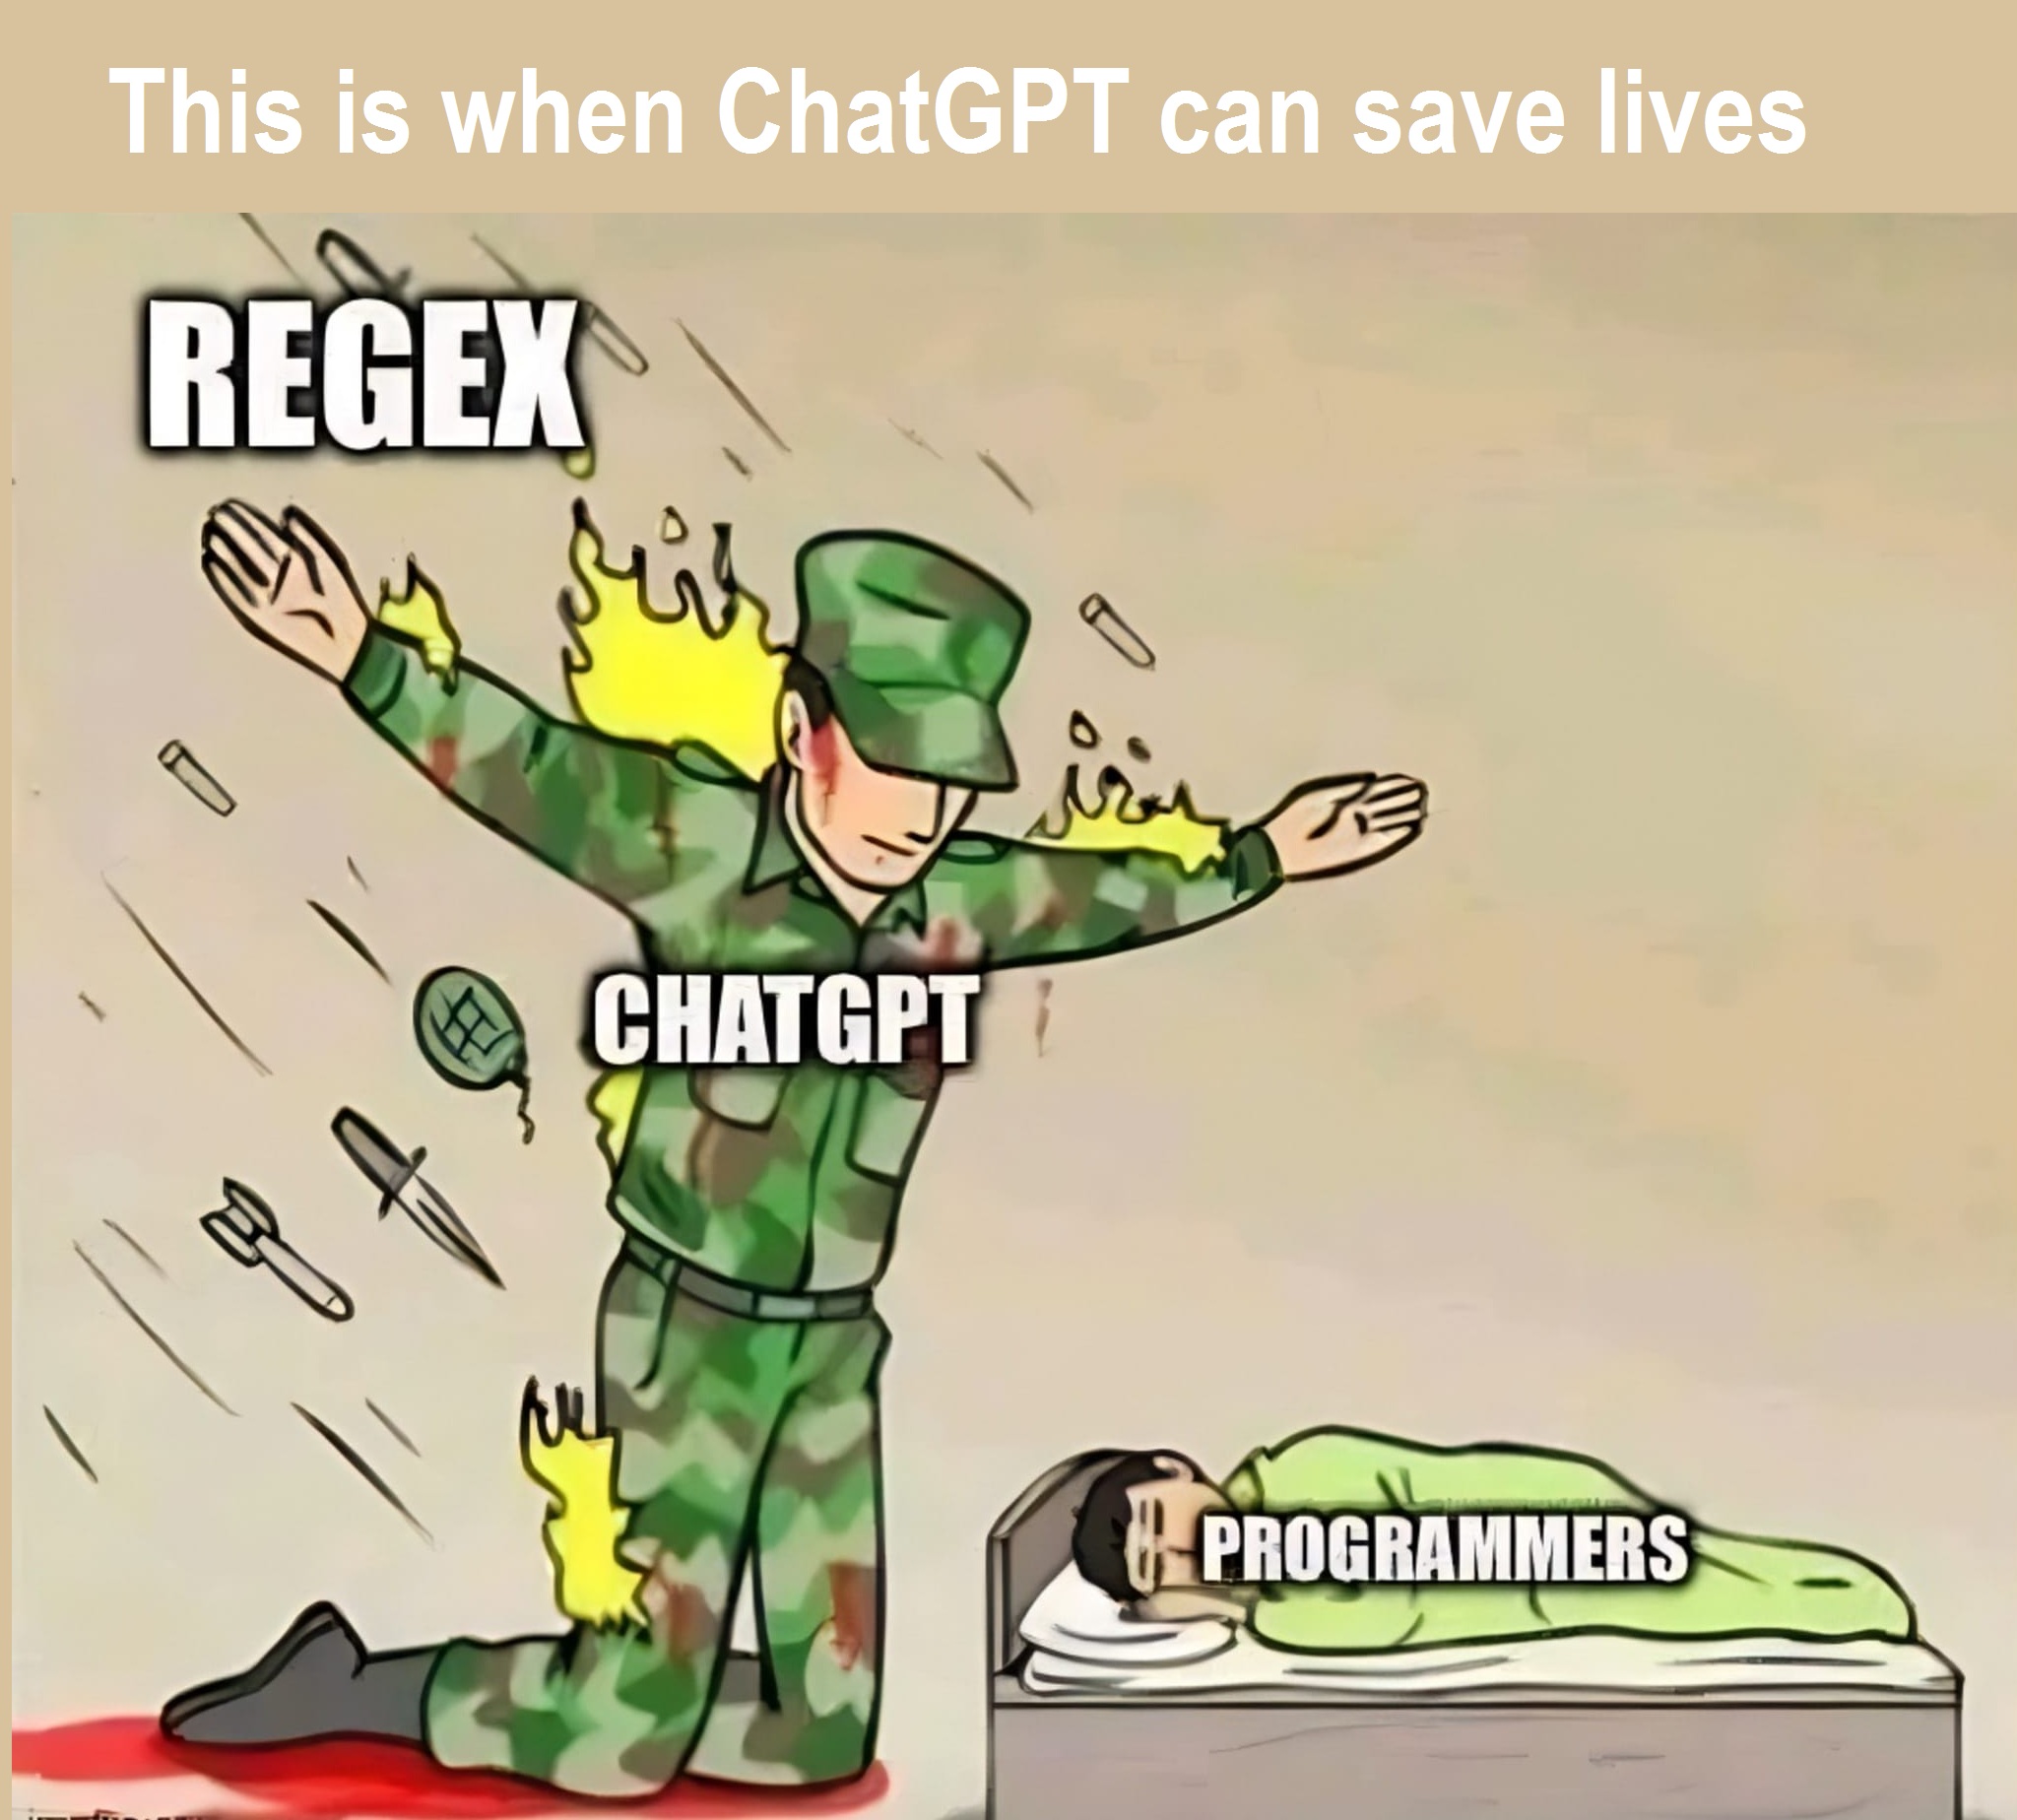 This is when ChatGPT can save lives